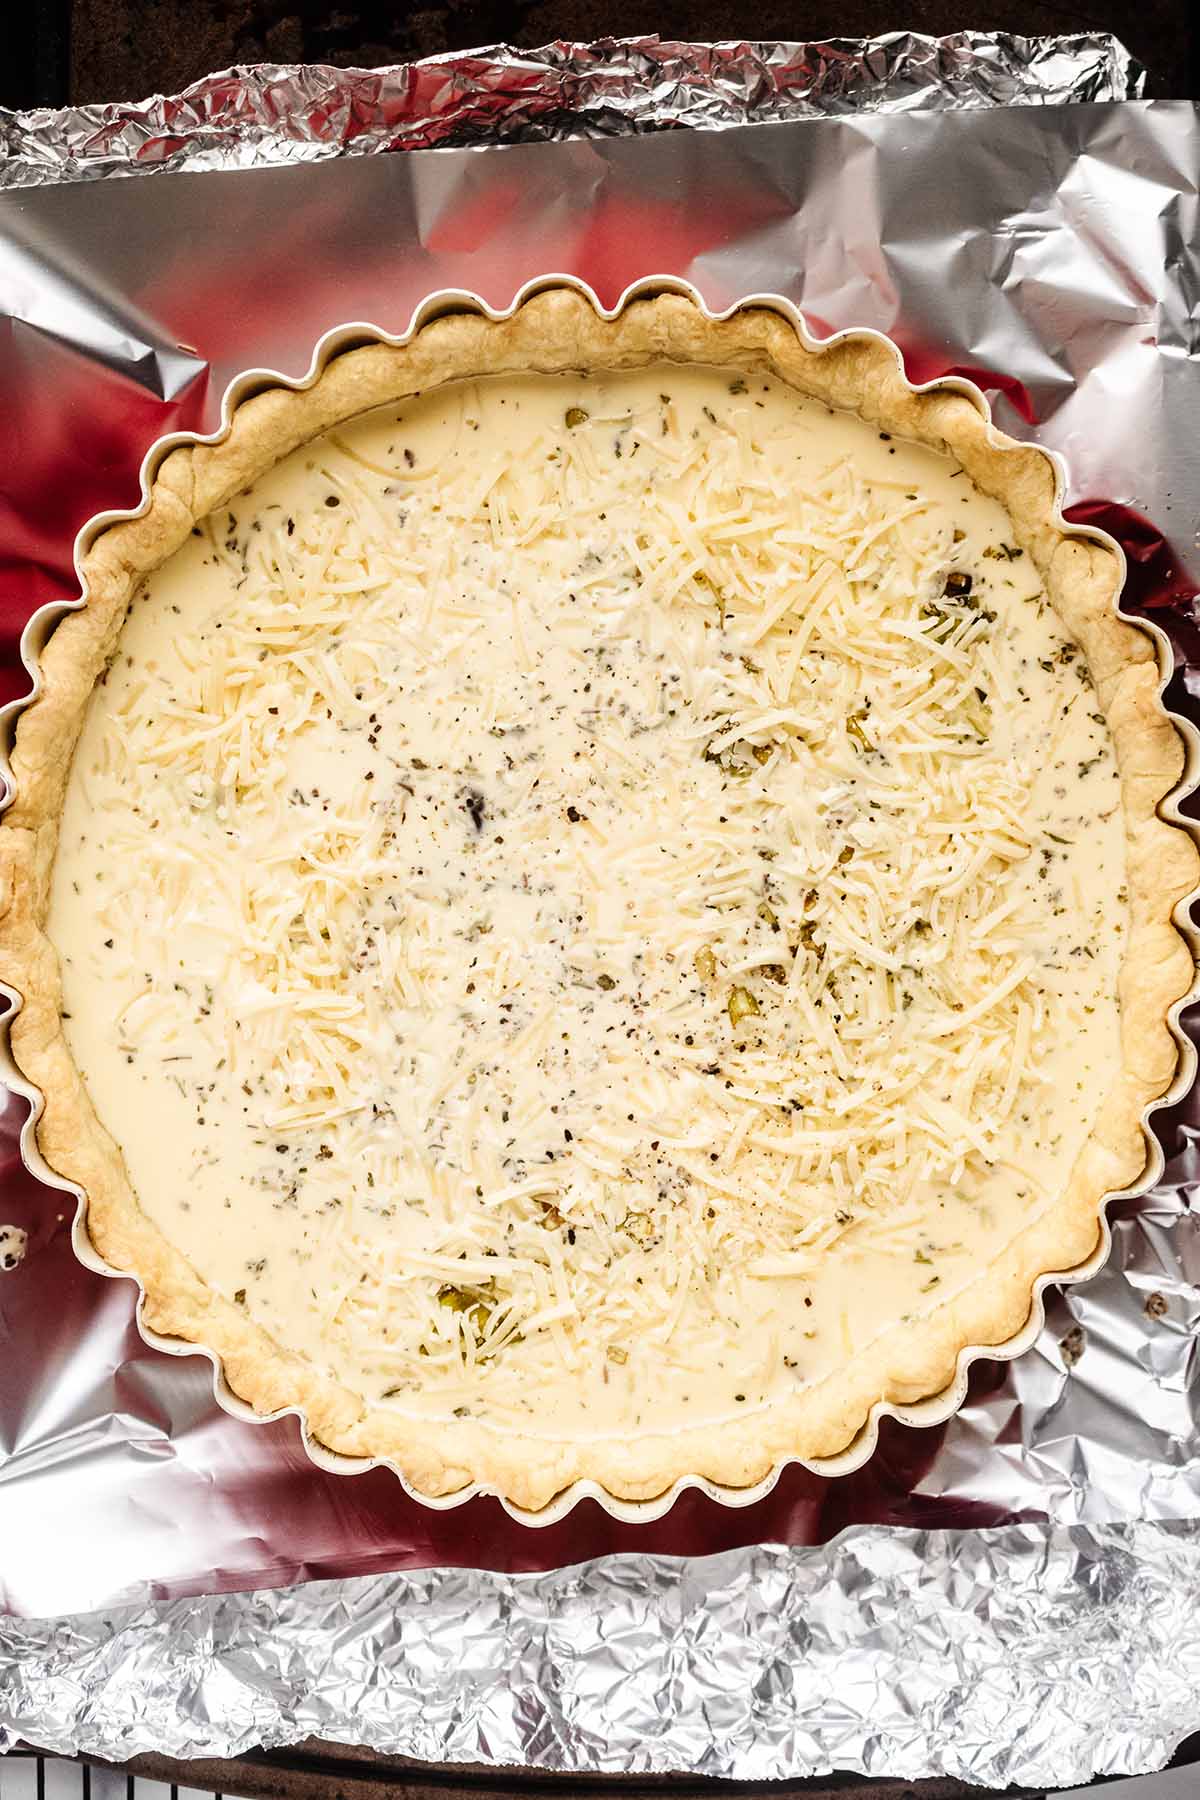 Liquid custard (eggs, milk, & cream) poured over the top of all ingredients in baked shall and tart pan.